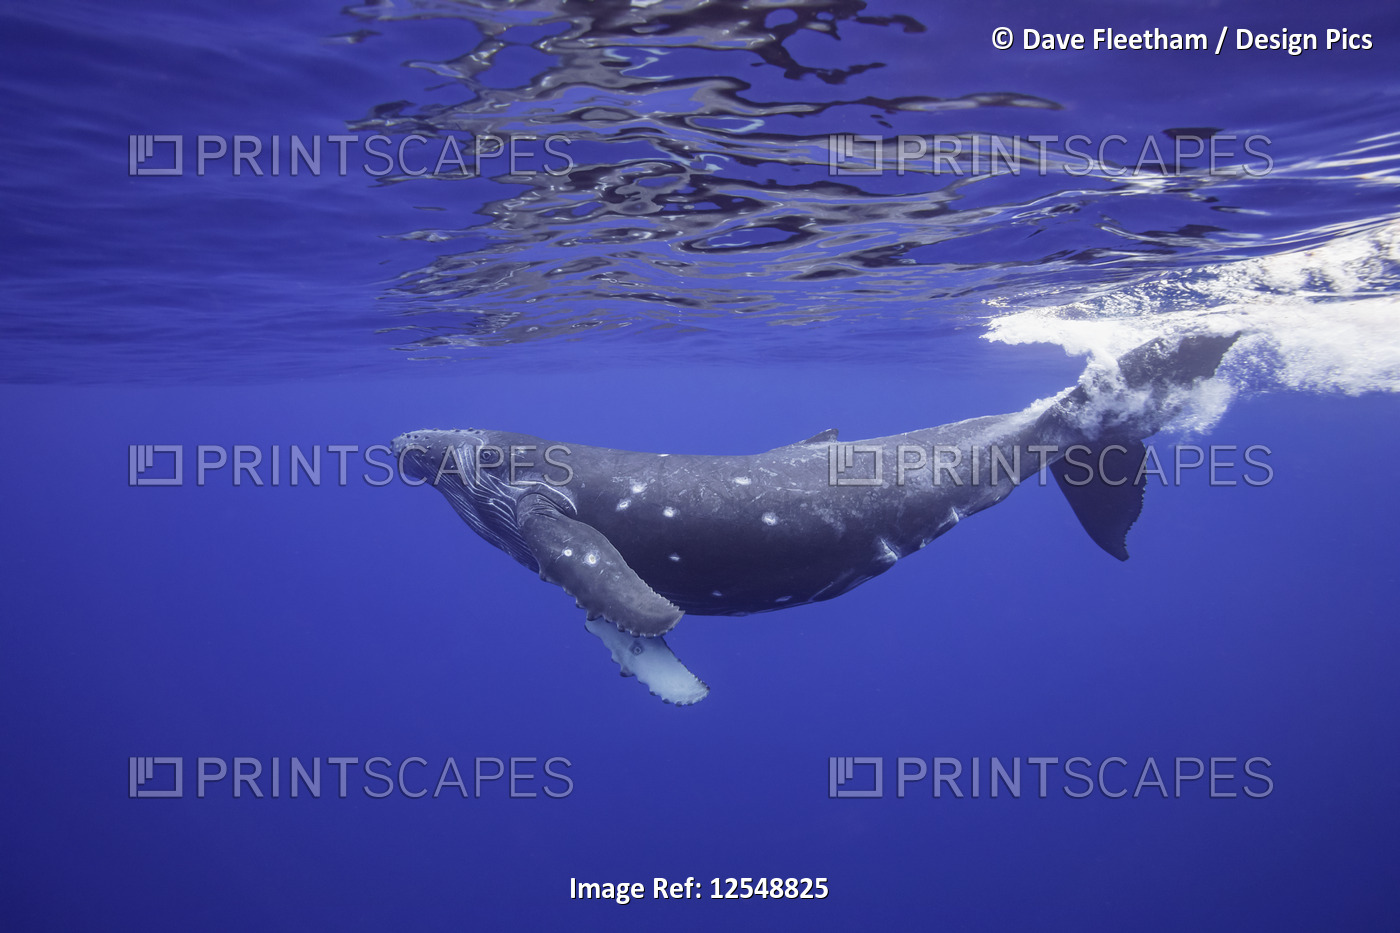 This Humpback whale (Megaptera novaeangliae) has a number of circular bite ...